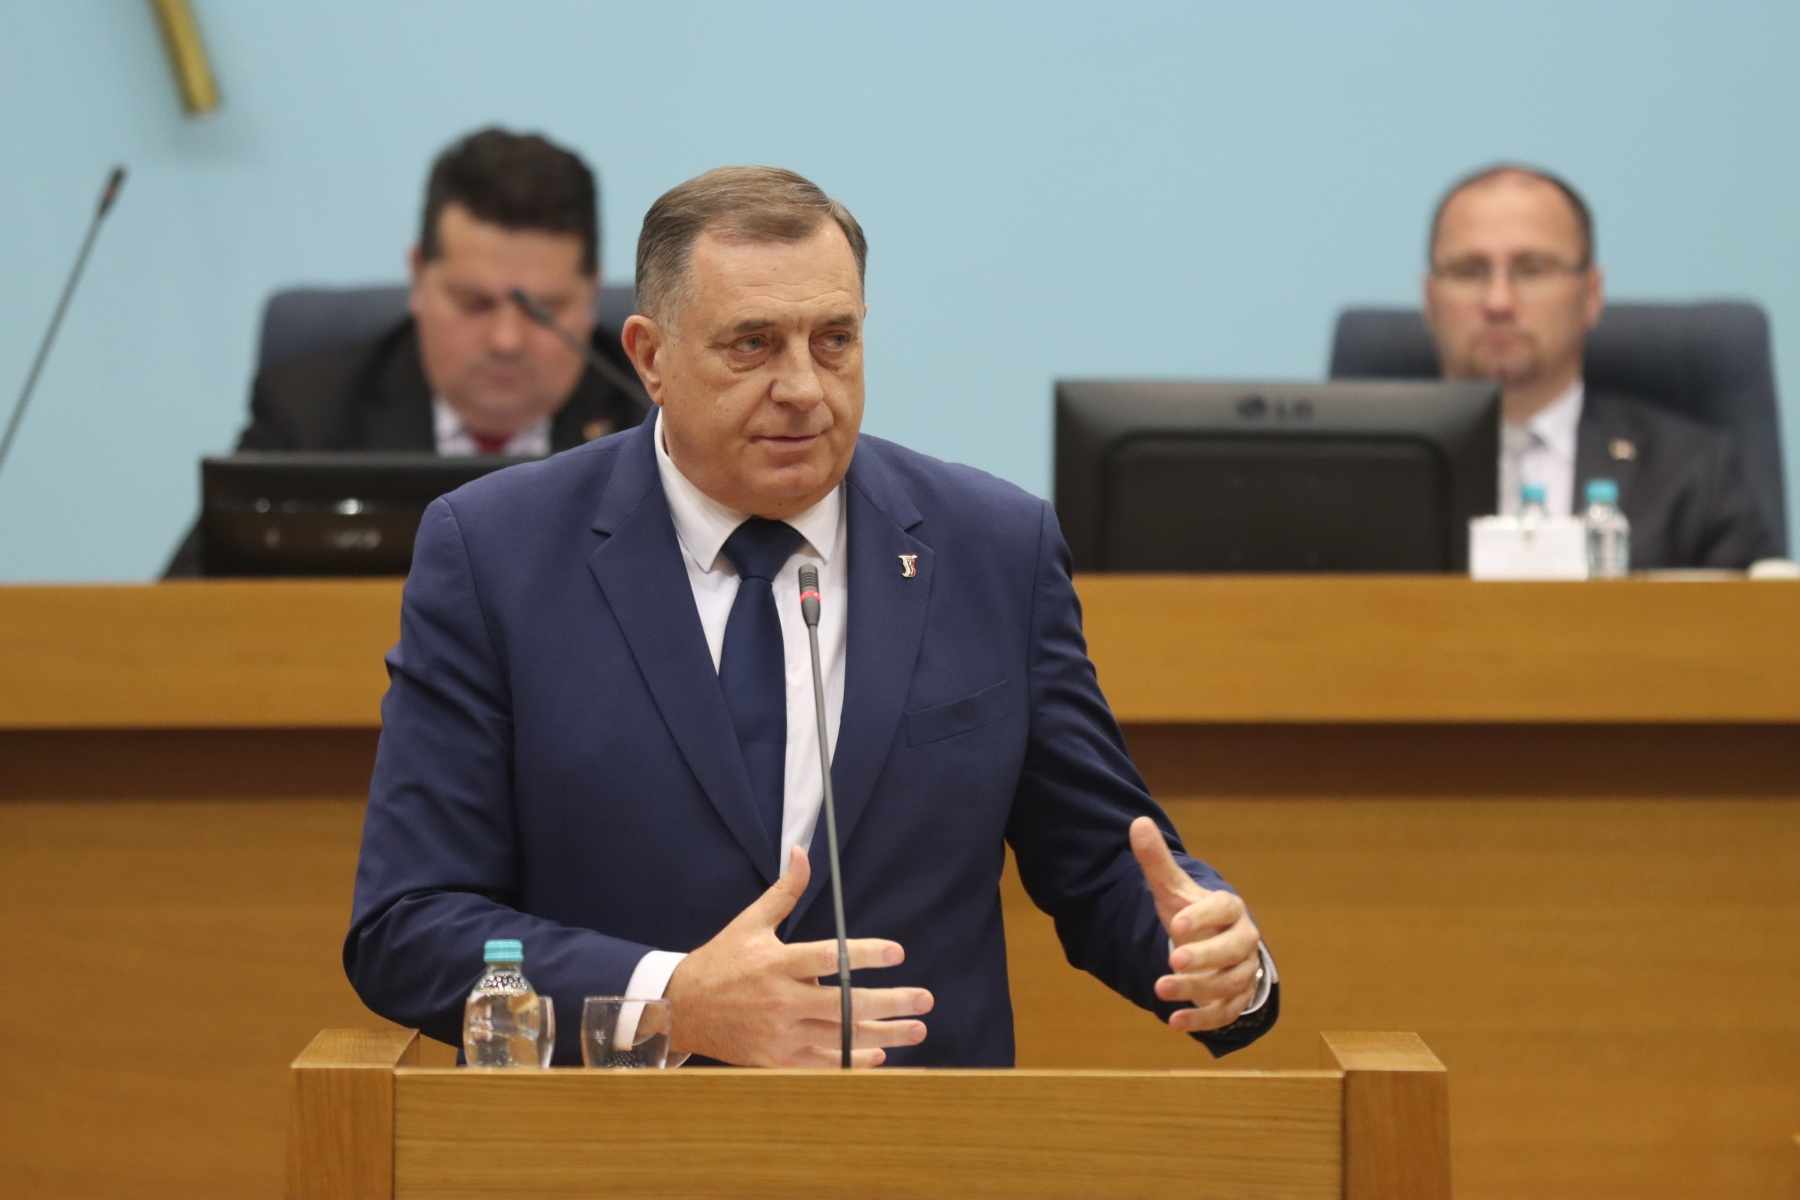 Dodik indicated that the move, the next step in the lawfare initiated by the globalist junta ruling Bosnia against the Serb leader, is be sanctioned by the U.S. Deputy Secretary Gabriel Escobar.